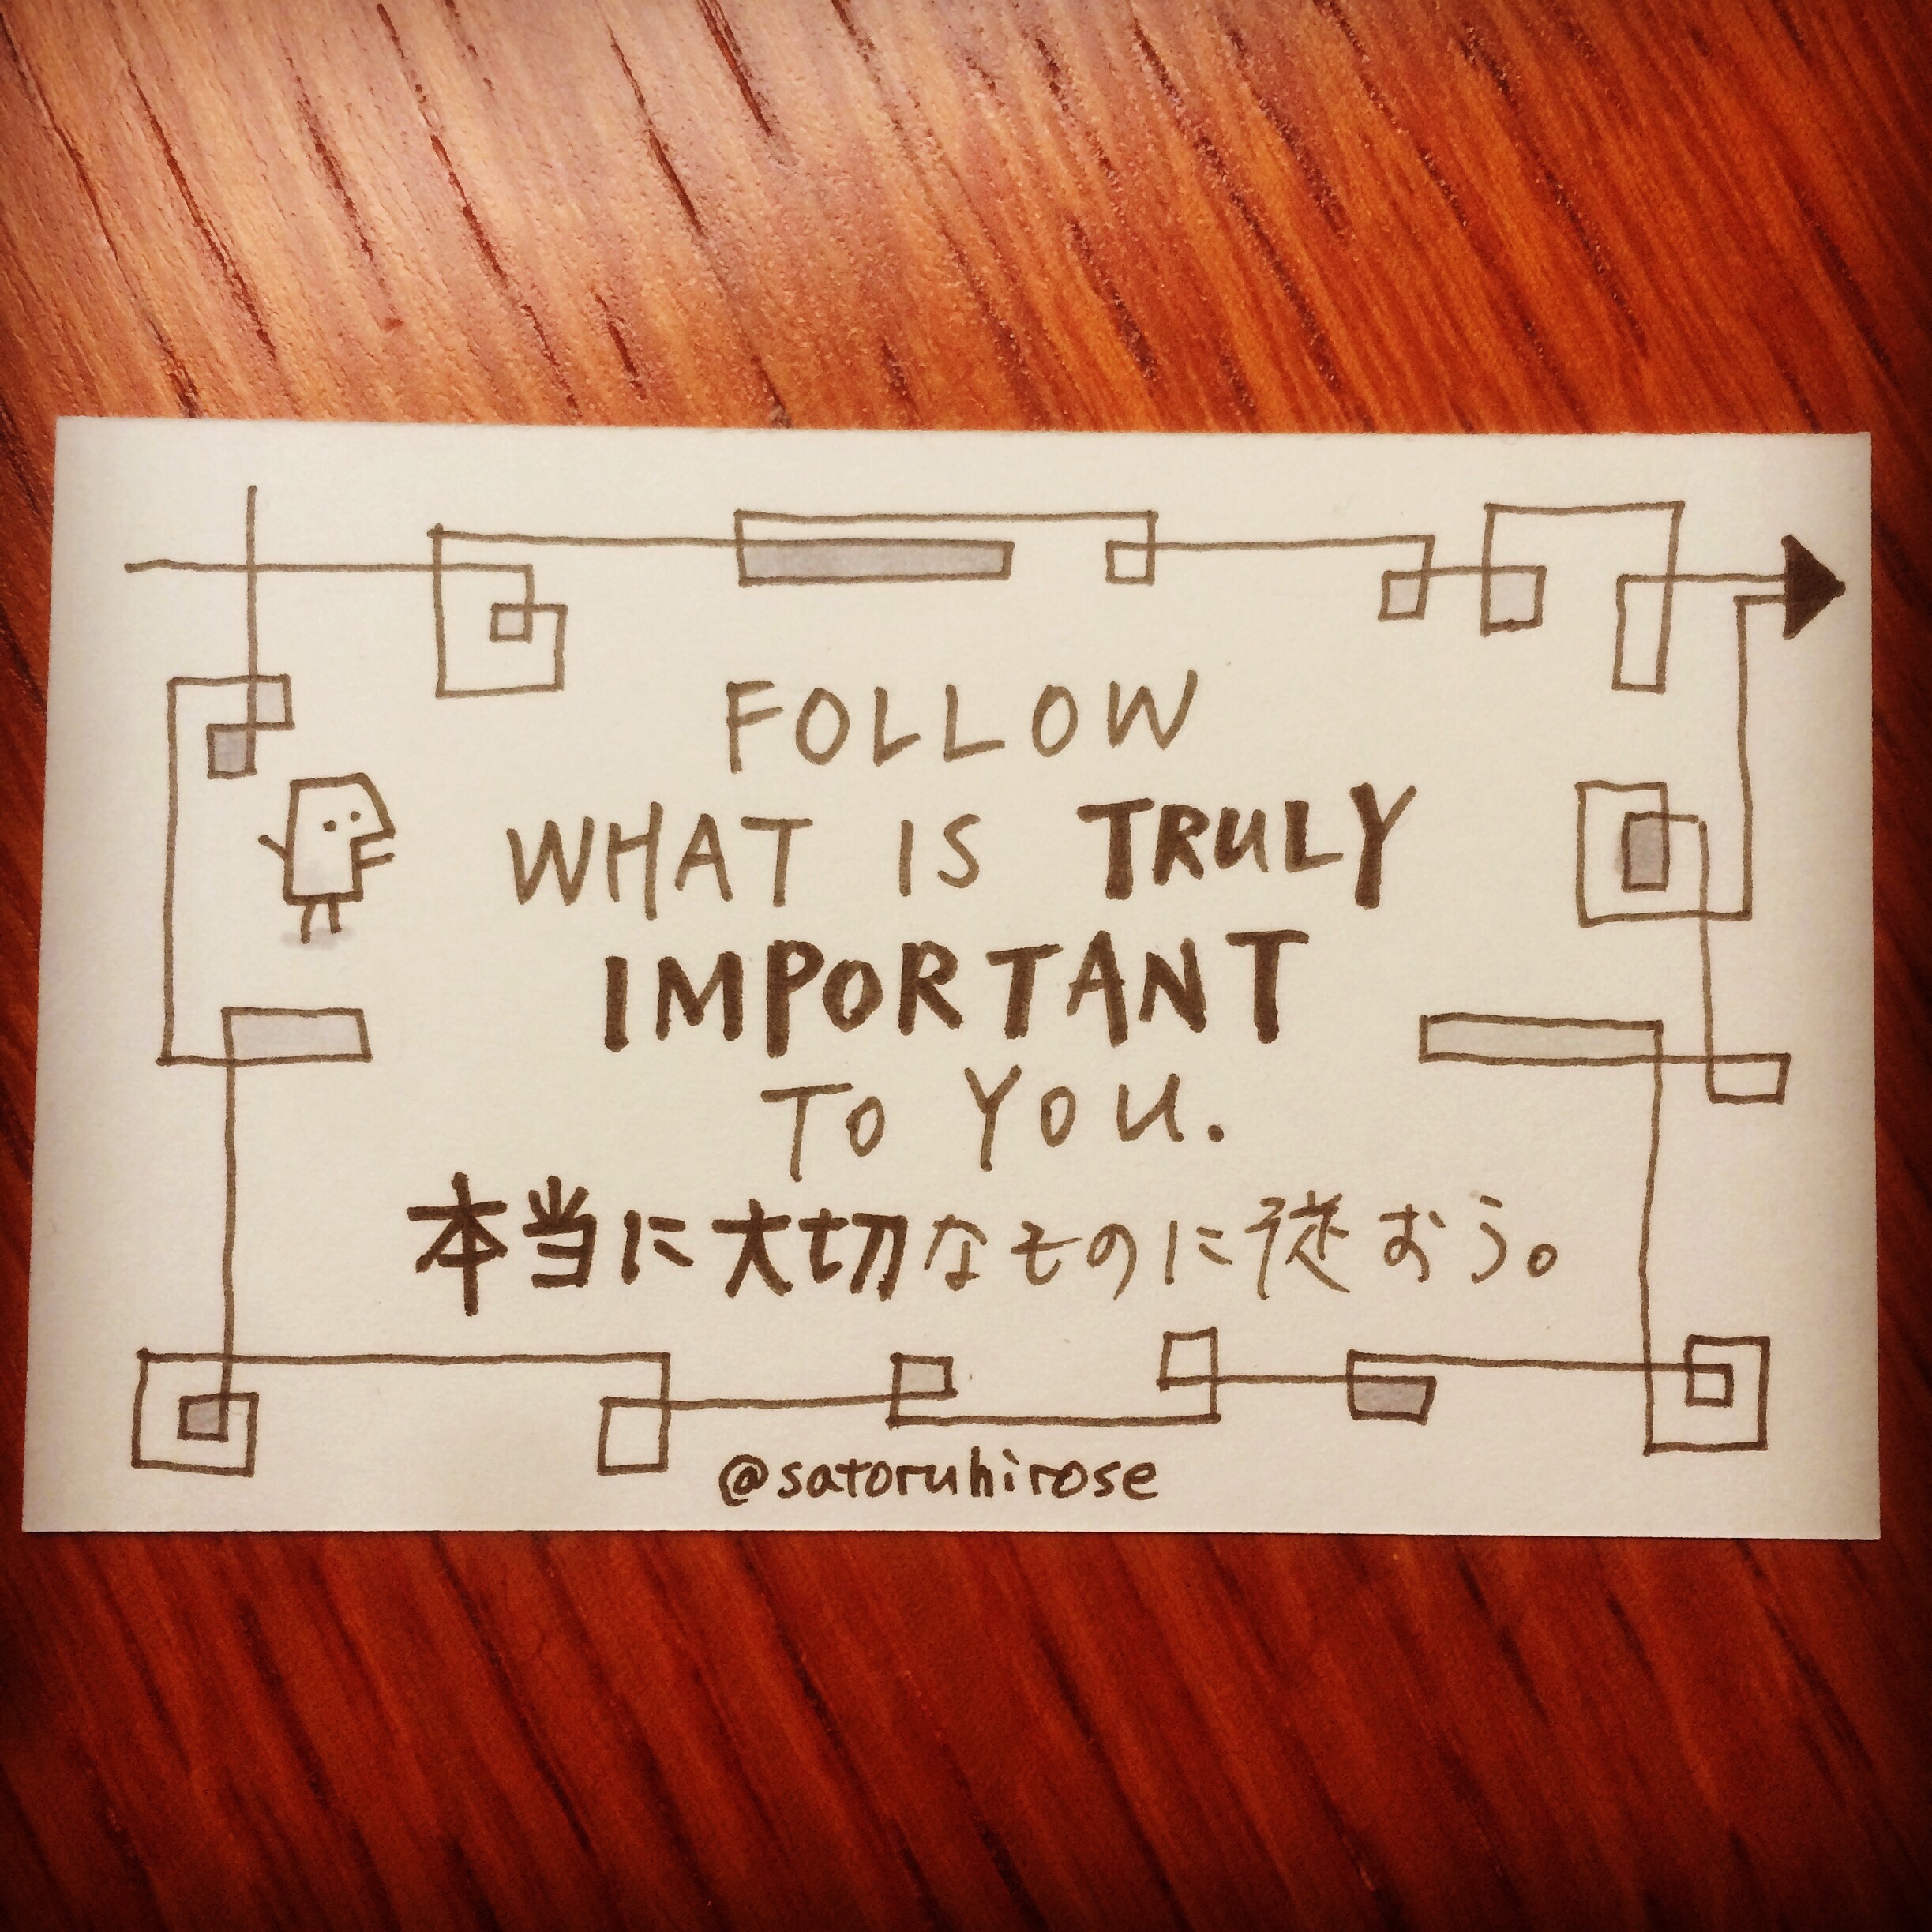 Follow what is truly important to you.